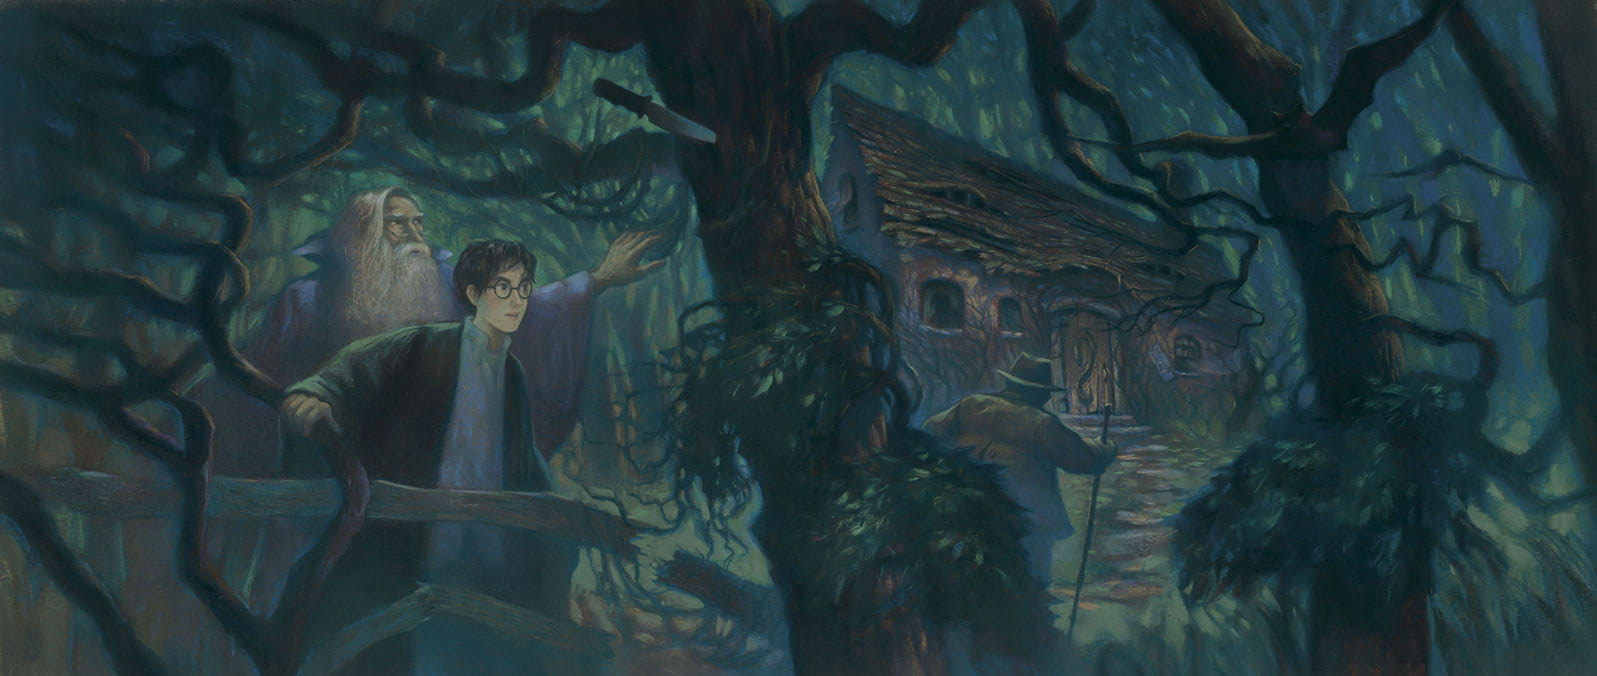 'Half-Blood Prince' deluxe edition full jacket artwork